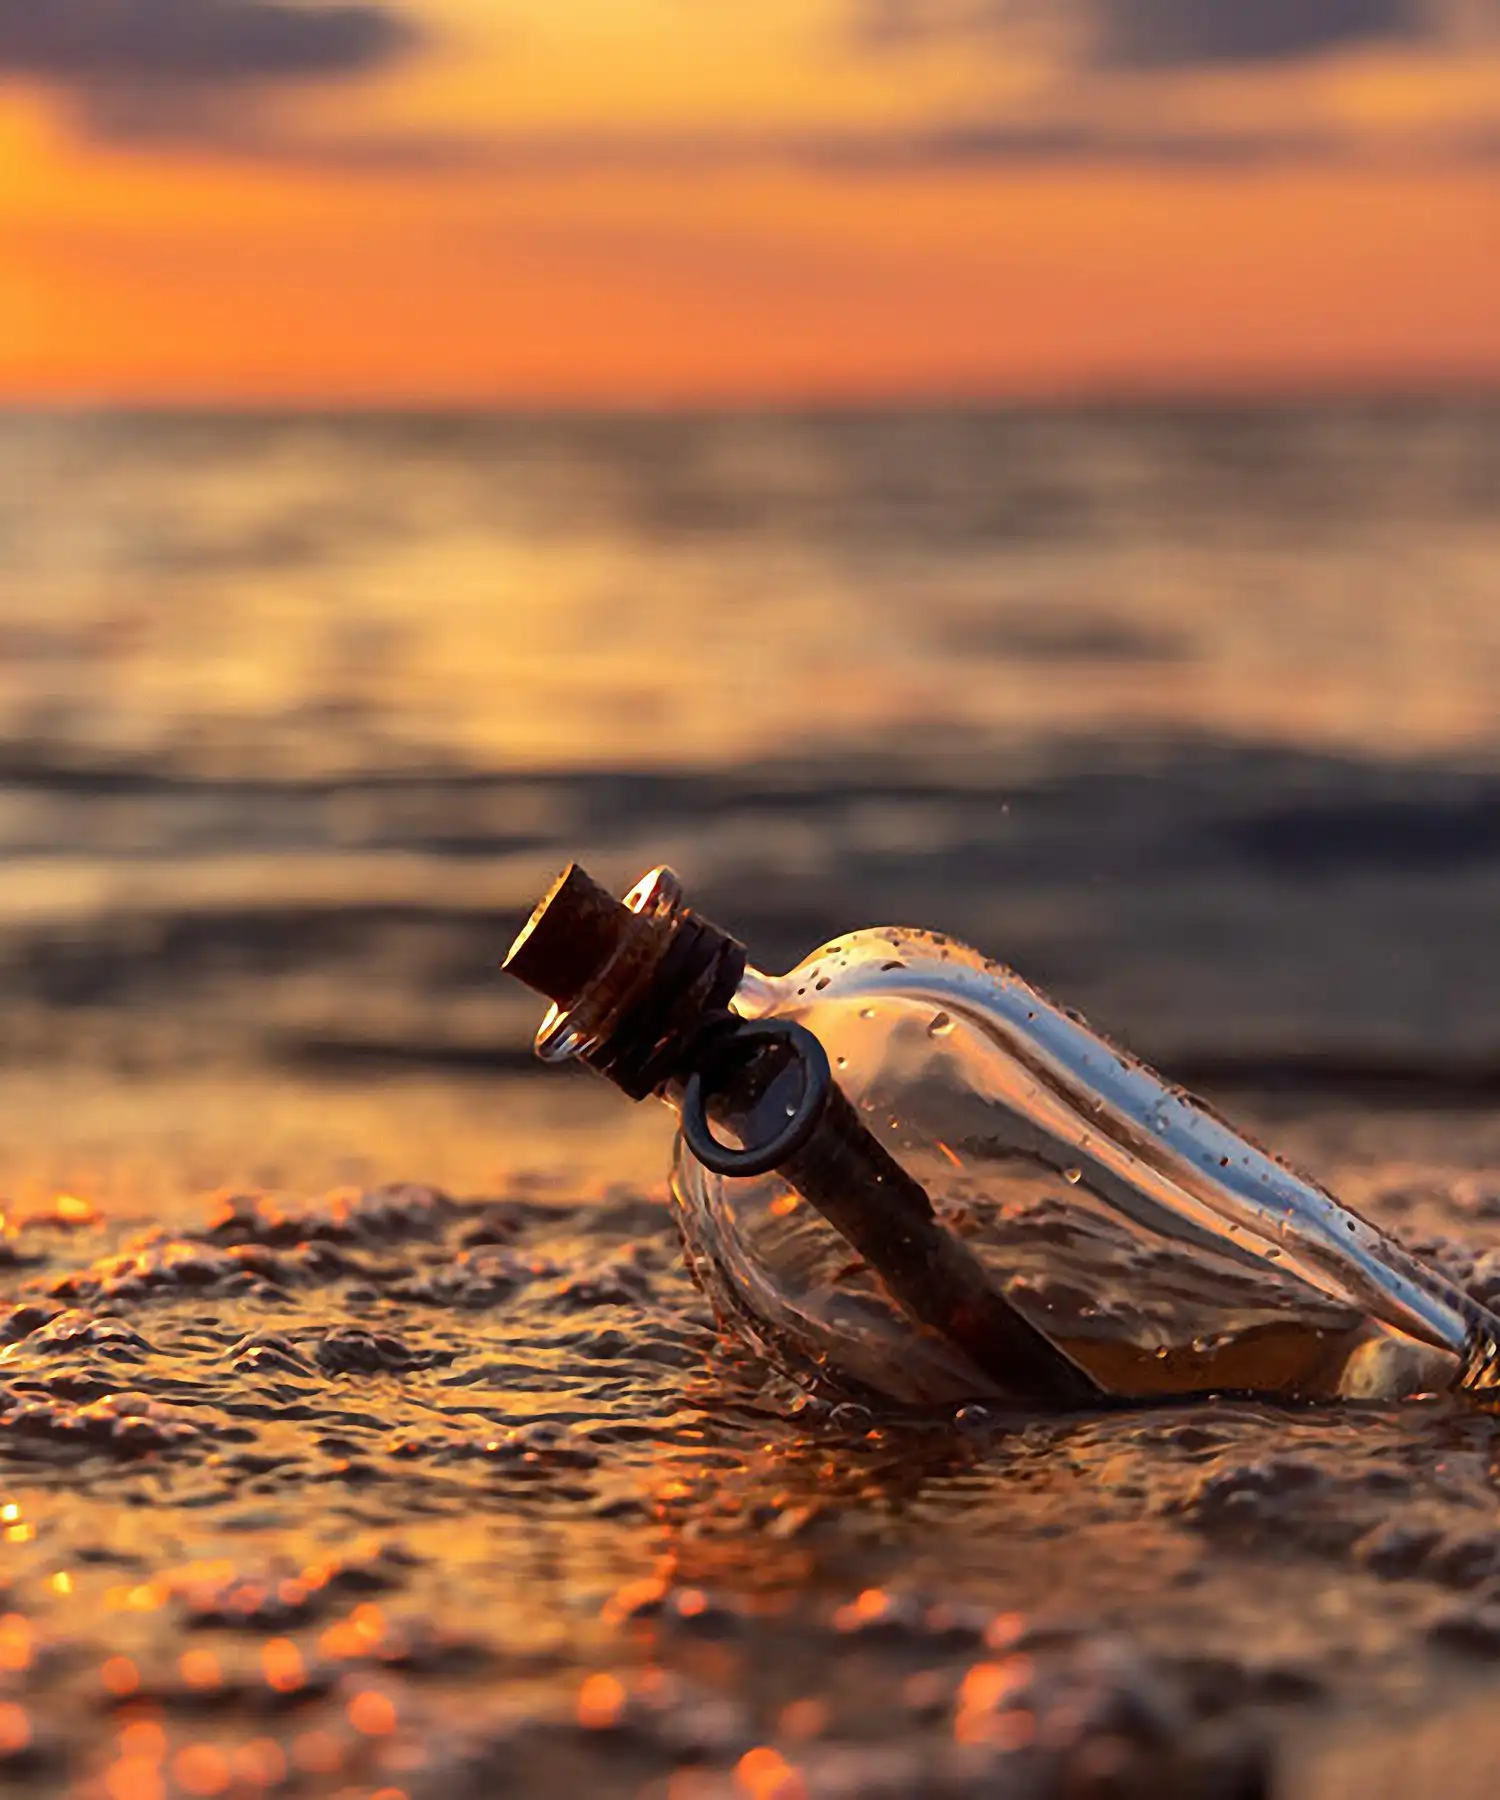 Sunset with message in a bottle washing ashore in Simmons Bayou, desktop view